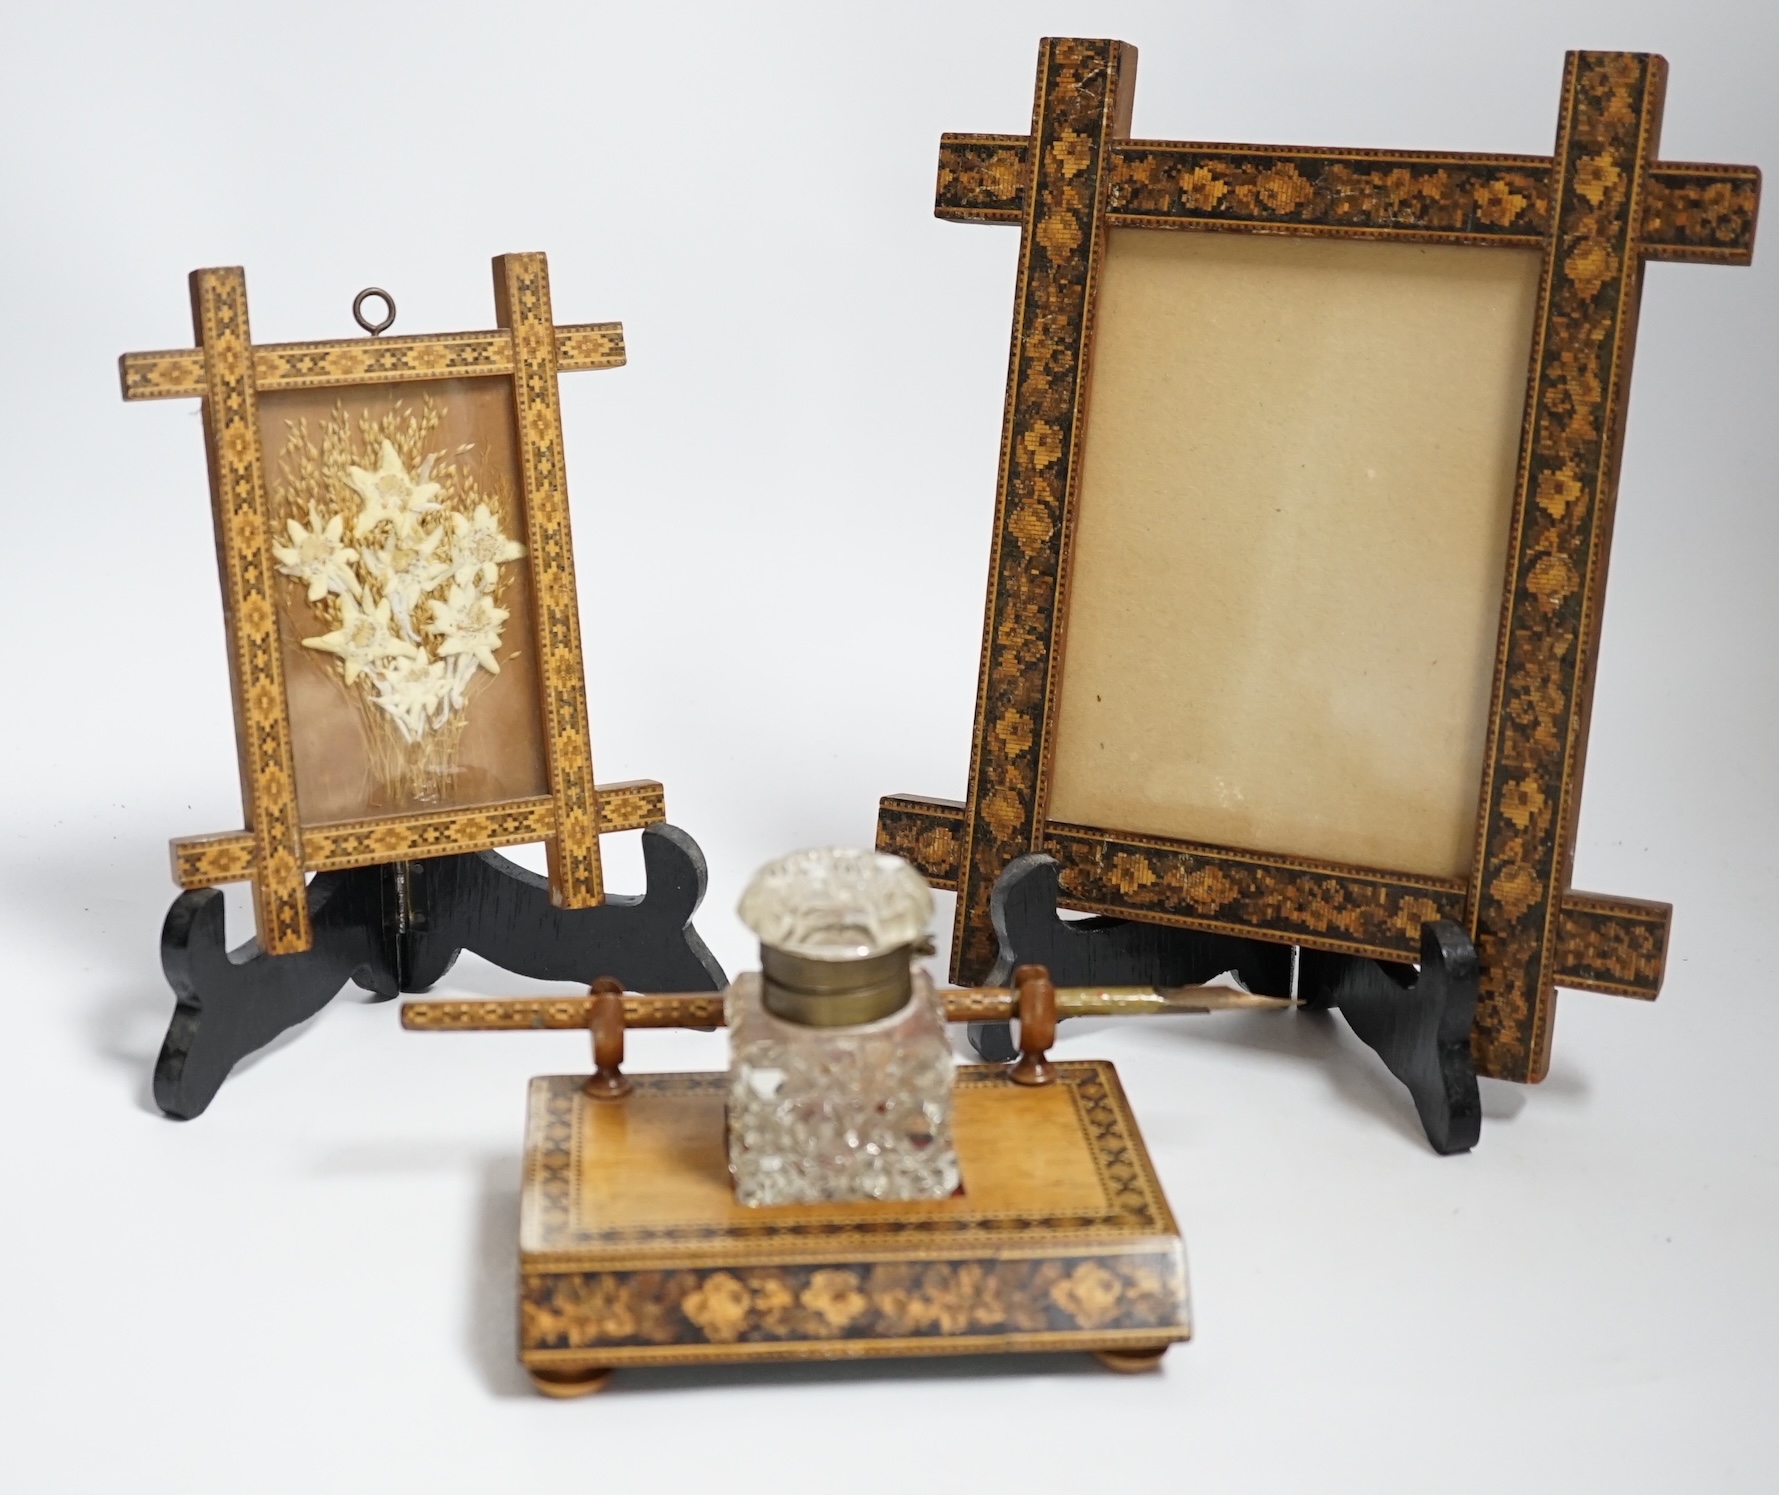 A Tunbridge ware inkstand with cut glass bottle and pen, together with two frames, largest 22.5cm high                                                                                                                      